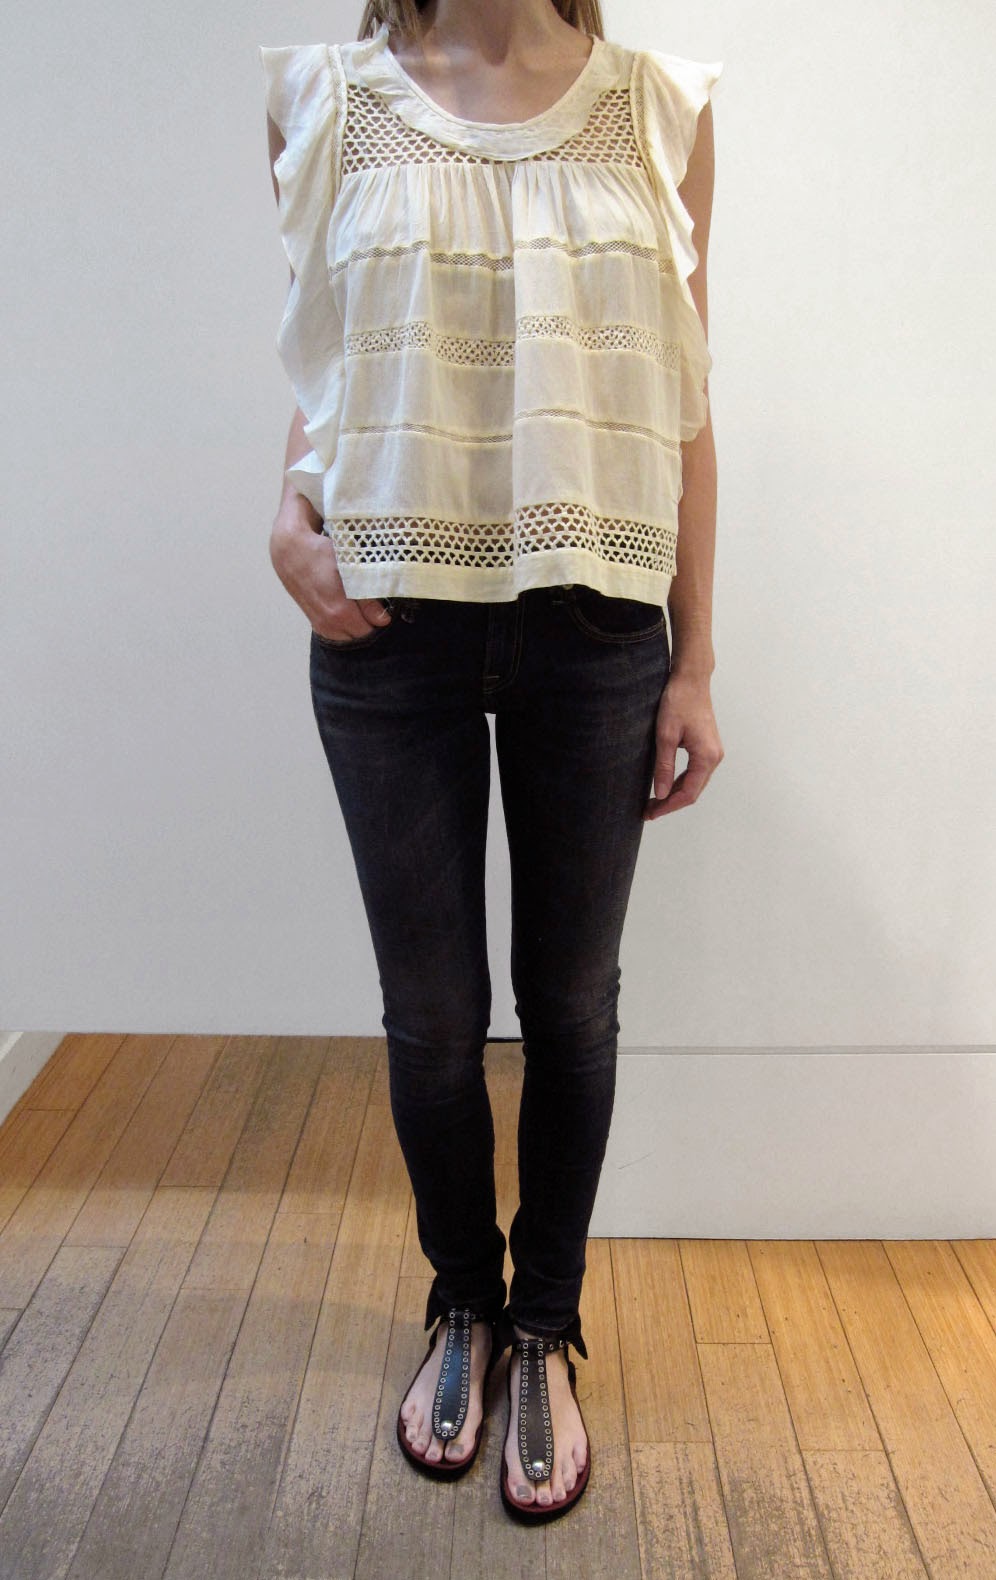 blog - new arrivals - sales - events - holiday hours: ISABEL MARANT: 4th Spring Shipment!